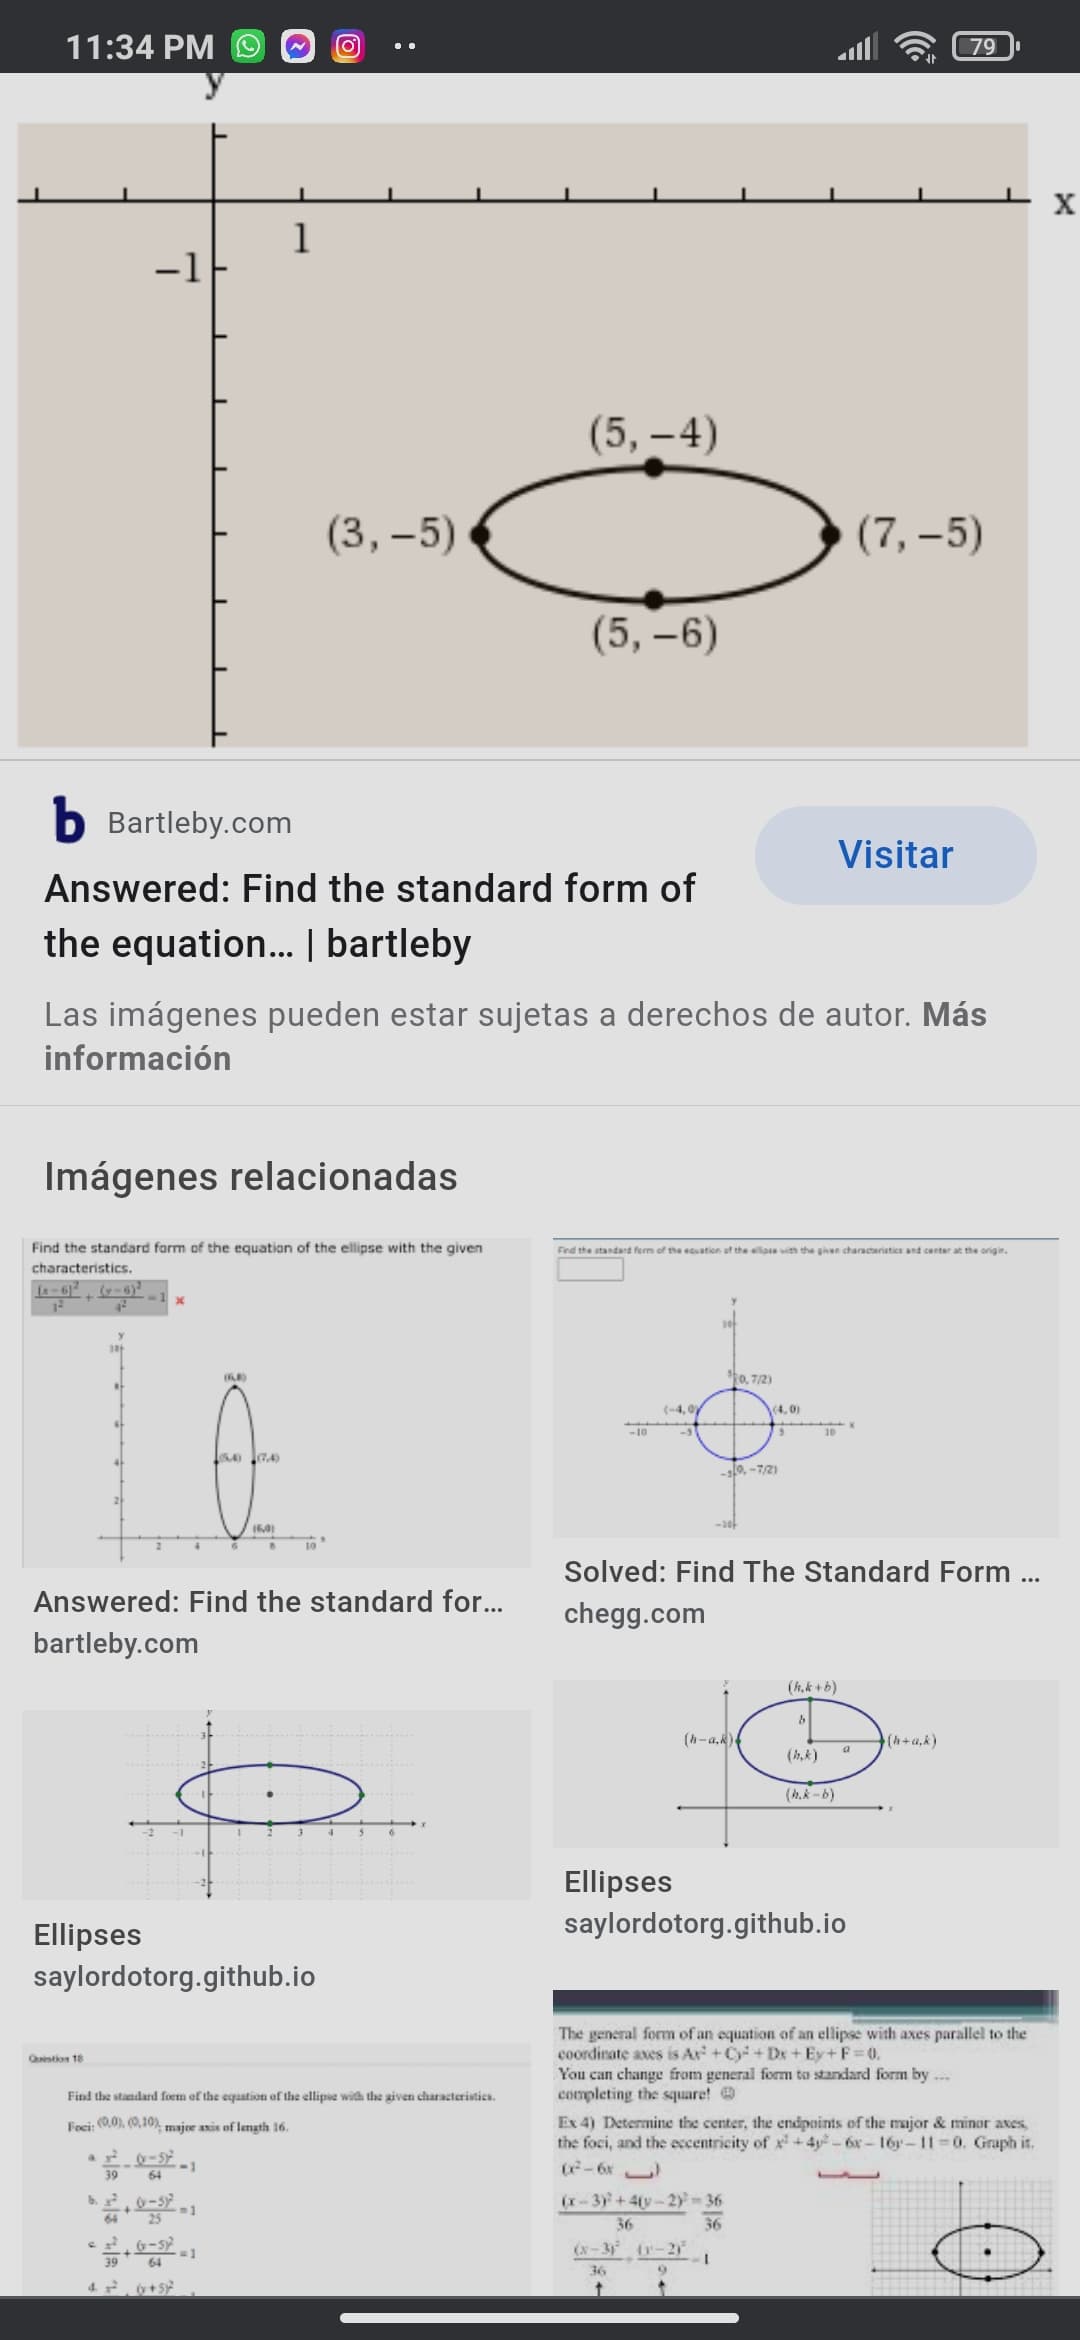 11:34 PM O
11ו.
79
1
-1
(5,-4)
(3, –5)
(7, –5)
(5,-6)
b Bartleby.com
Visitar
Answered: Find the standard form of
the equation. | bartleby
Las imágenes pueden estar sujetas a derechos de autor. Más
información
Imágenes relacionadas
Find the standard form of the equation of the ellipse with the given
Find the standard ferm of the ecuation af the allip ith the given characteriatice and center at the origin.
characteristics.
La-6)
(-6)
12
Ro, 7/2)
(-4,0
(4,0)
-10
10
-0, -7/2)
-30-
10
Solved: Find The Standard Form ..
Answered: Find the standard for..
chegg.com
bartleby.com
(h,k + b)
(h-a,k)
(h+a,k)
(h,k)
(h.k -b)
Ellipses
Ellipses
saylordotorg.github.io
saylordotorg.github.io
The general form of an equation of an ellipse with axes parallel to the
coordinate axes is Ar +C+ Dx + Ey+F=0.
You can change from general form to standard form by .
completing the square!
Ex 4) Determine the center, the endpoints of the major & minor aves,
the foci, and the eccentricity of x + 4y - 6x - 16y-11 0. Graph it.
- 6x )
Qstion 18
Find the standard form of the equation of the ellipse with the aiven characteristics.
Foci: (0,0), (0,10), major axis of length 16.
a.
64
6.
(x-3)+4(y-2y-36
3D1
36
36
e G-s
(x-3 -2
39
64
36
4.. +5
